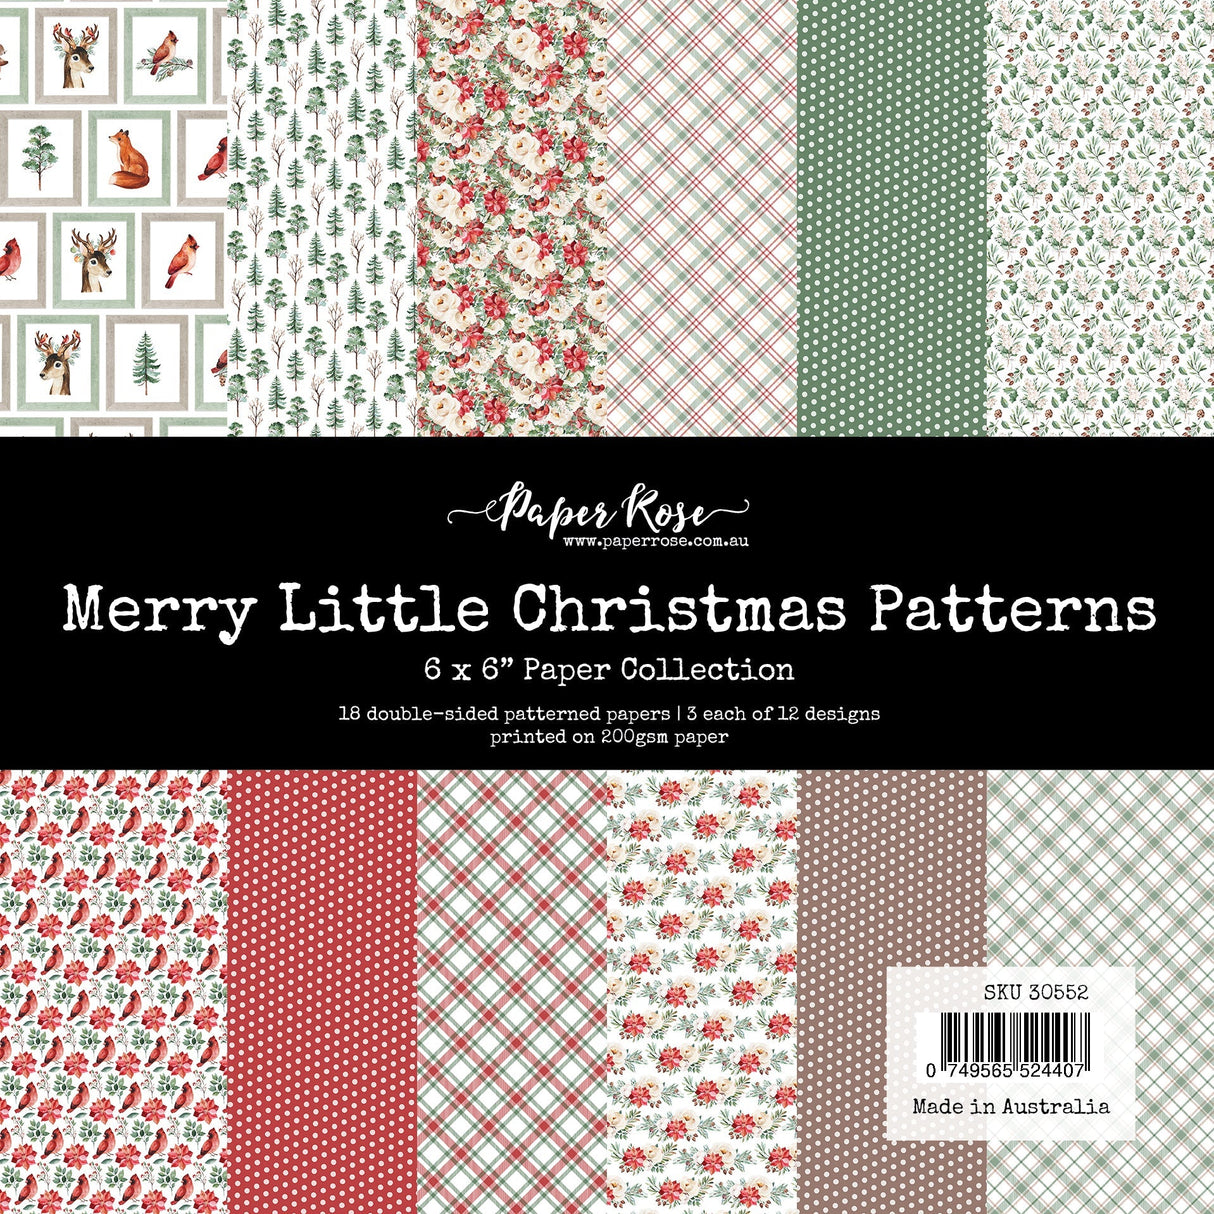 Merry Little Christmas Patterns 6x6 Paper Collection 30552 - Paper Rose Studio